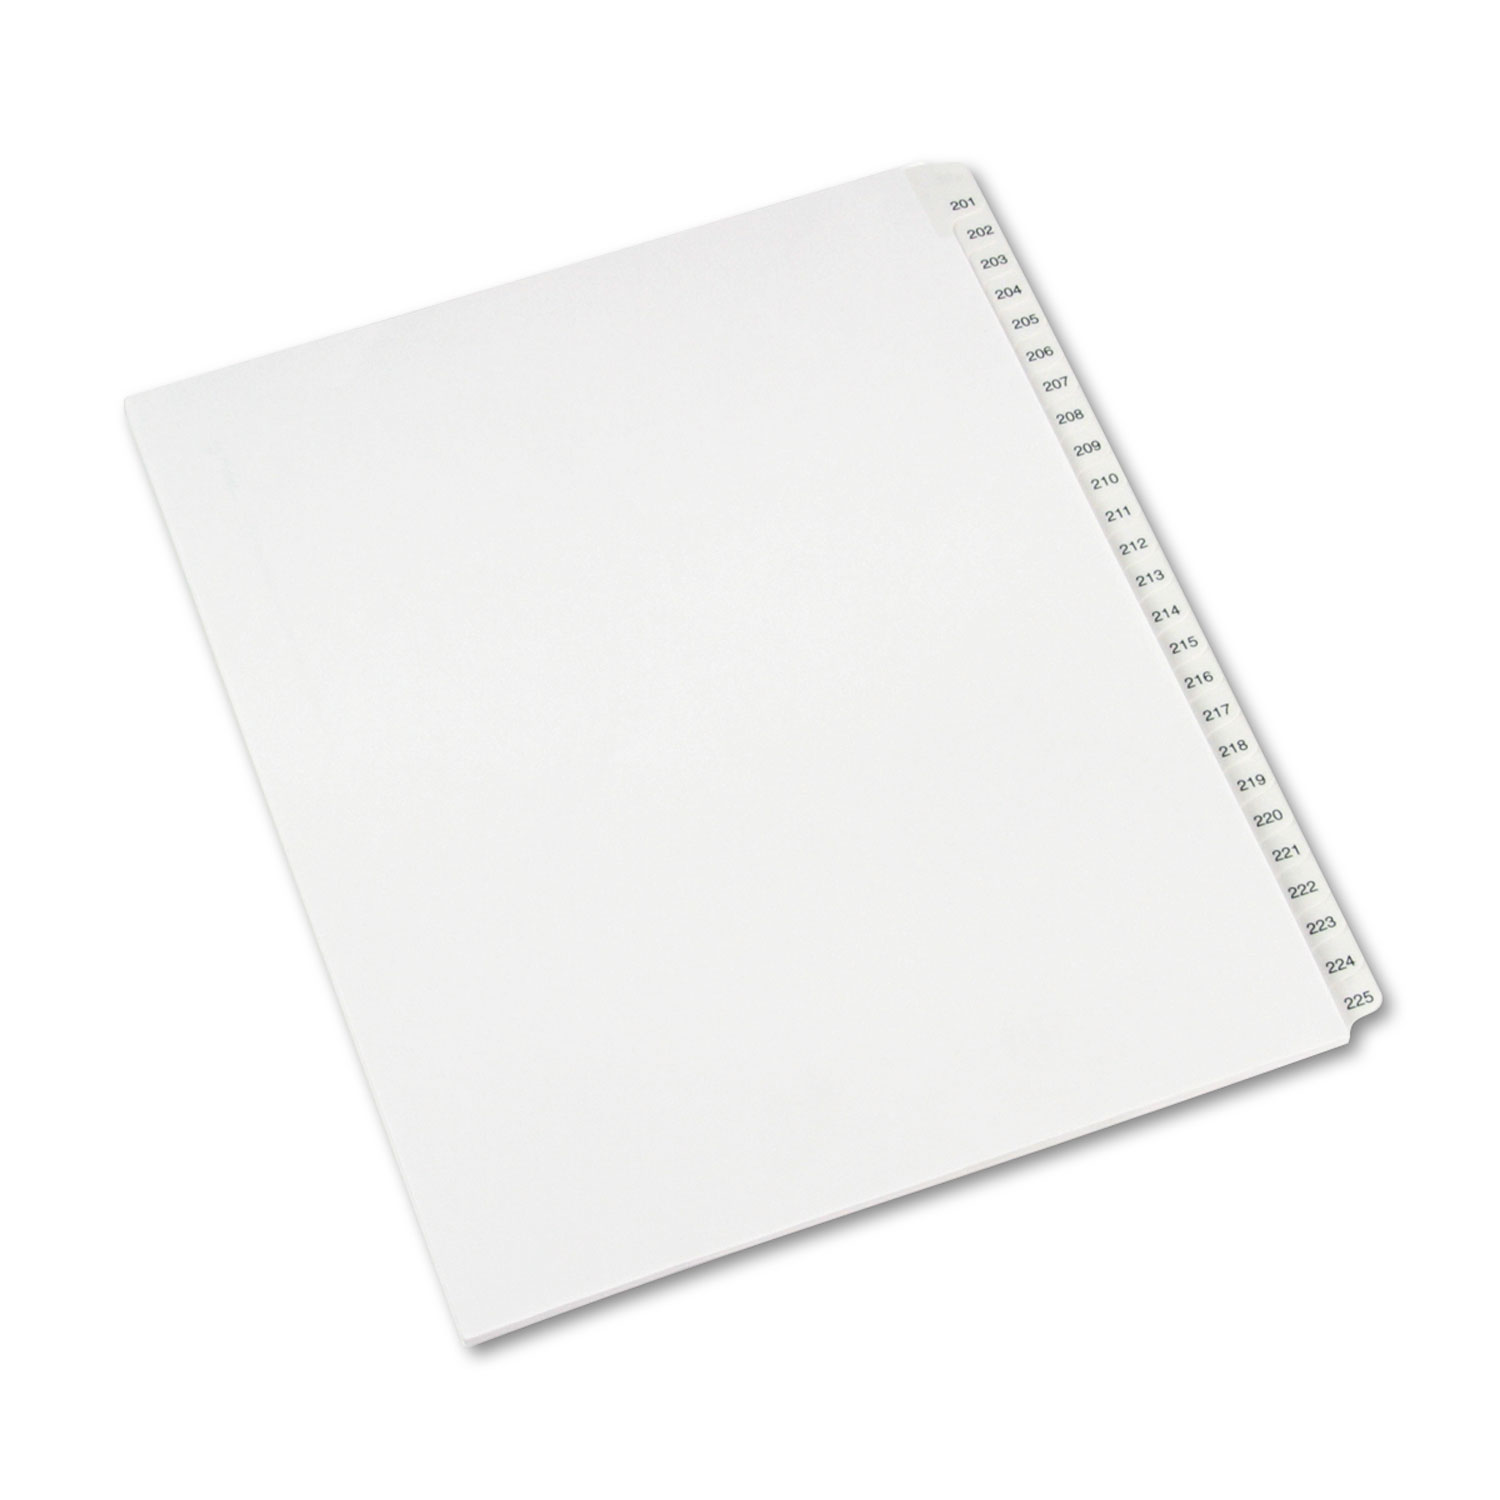 Allstate-Style Legal Exhibit Side Tab Dividers, 25-Tab, 201-225, Letter, White